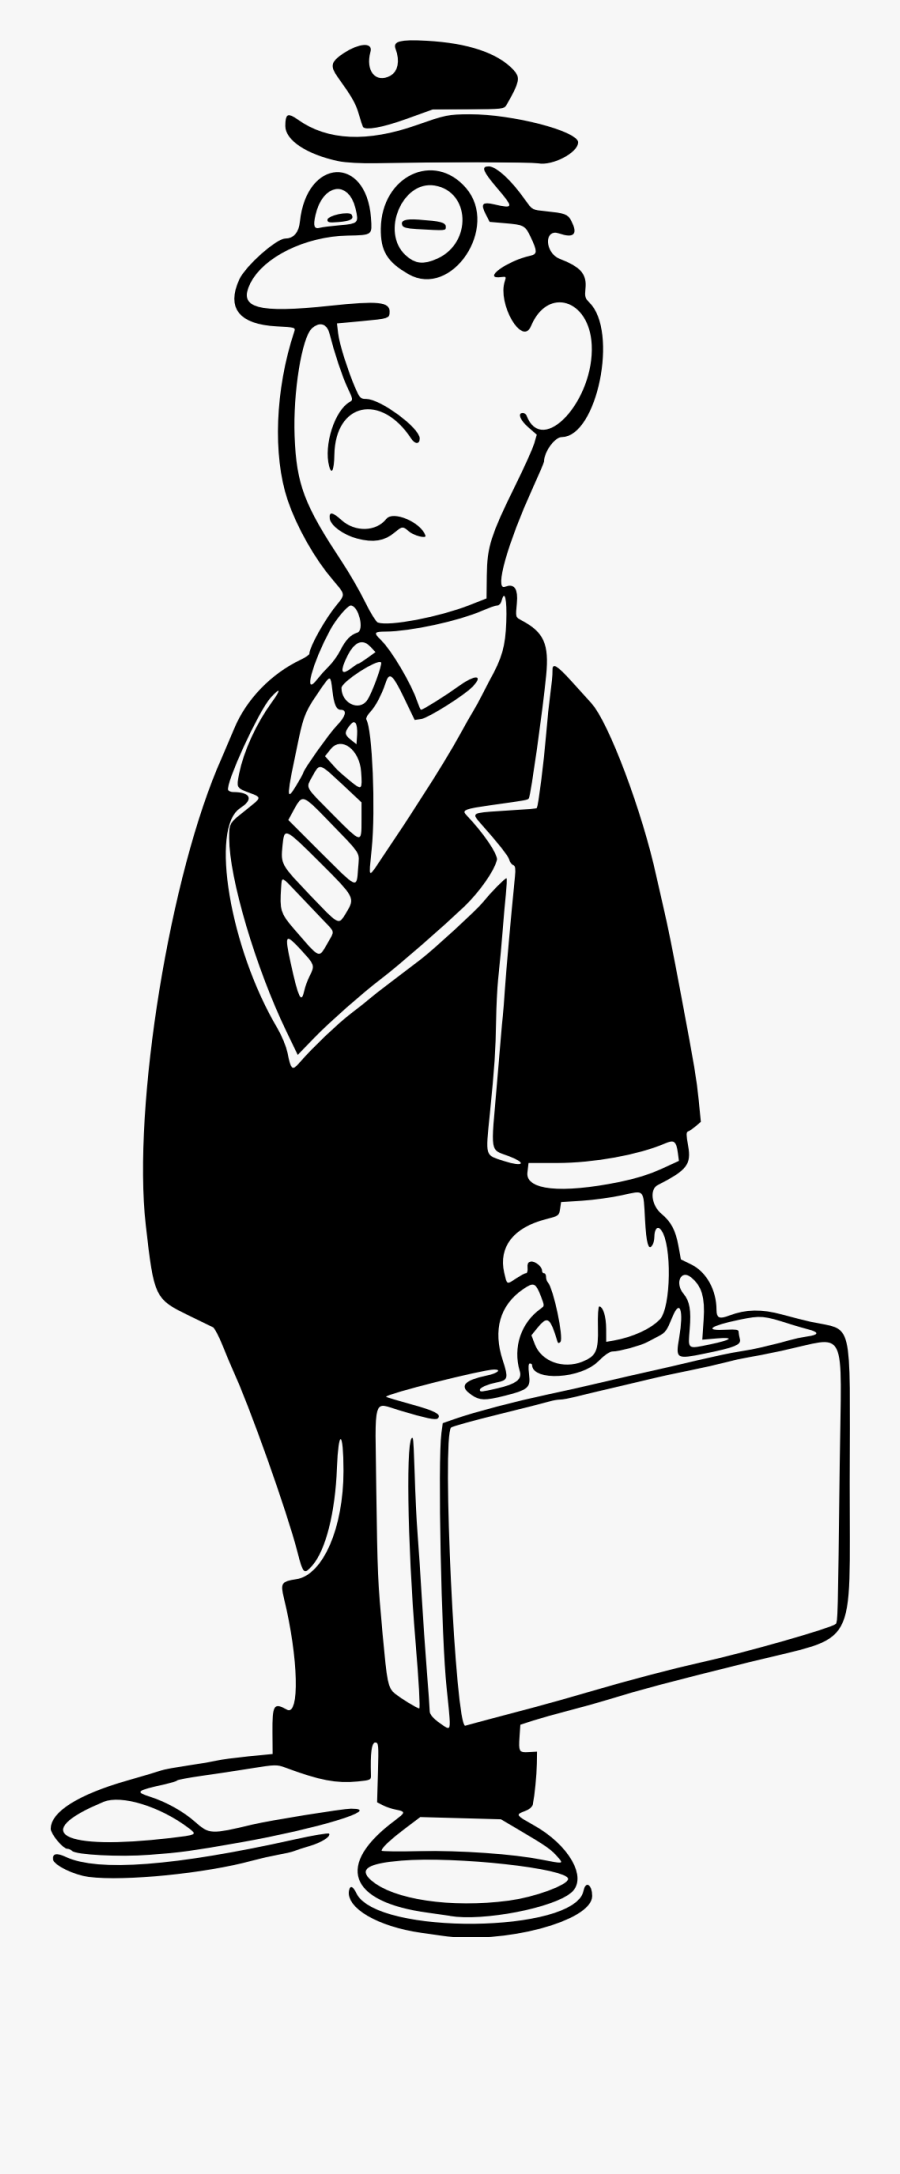 Briefcase Clipart Tycoon - Clipart Business Man, Transparent Clipart